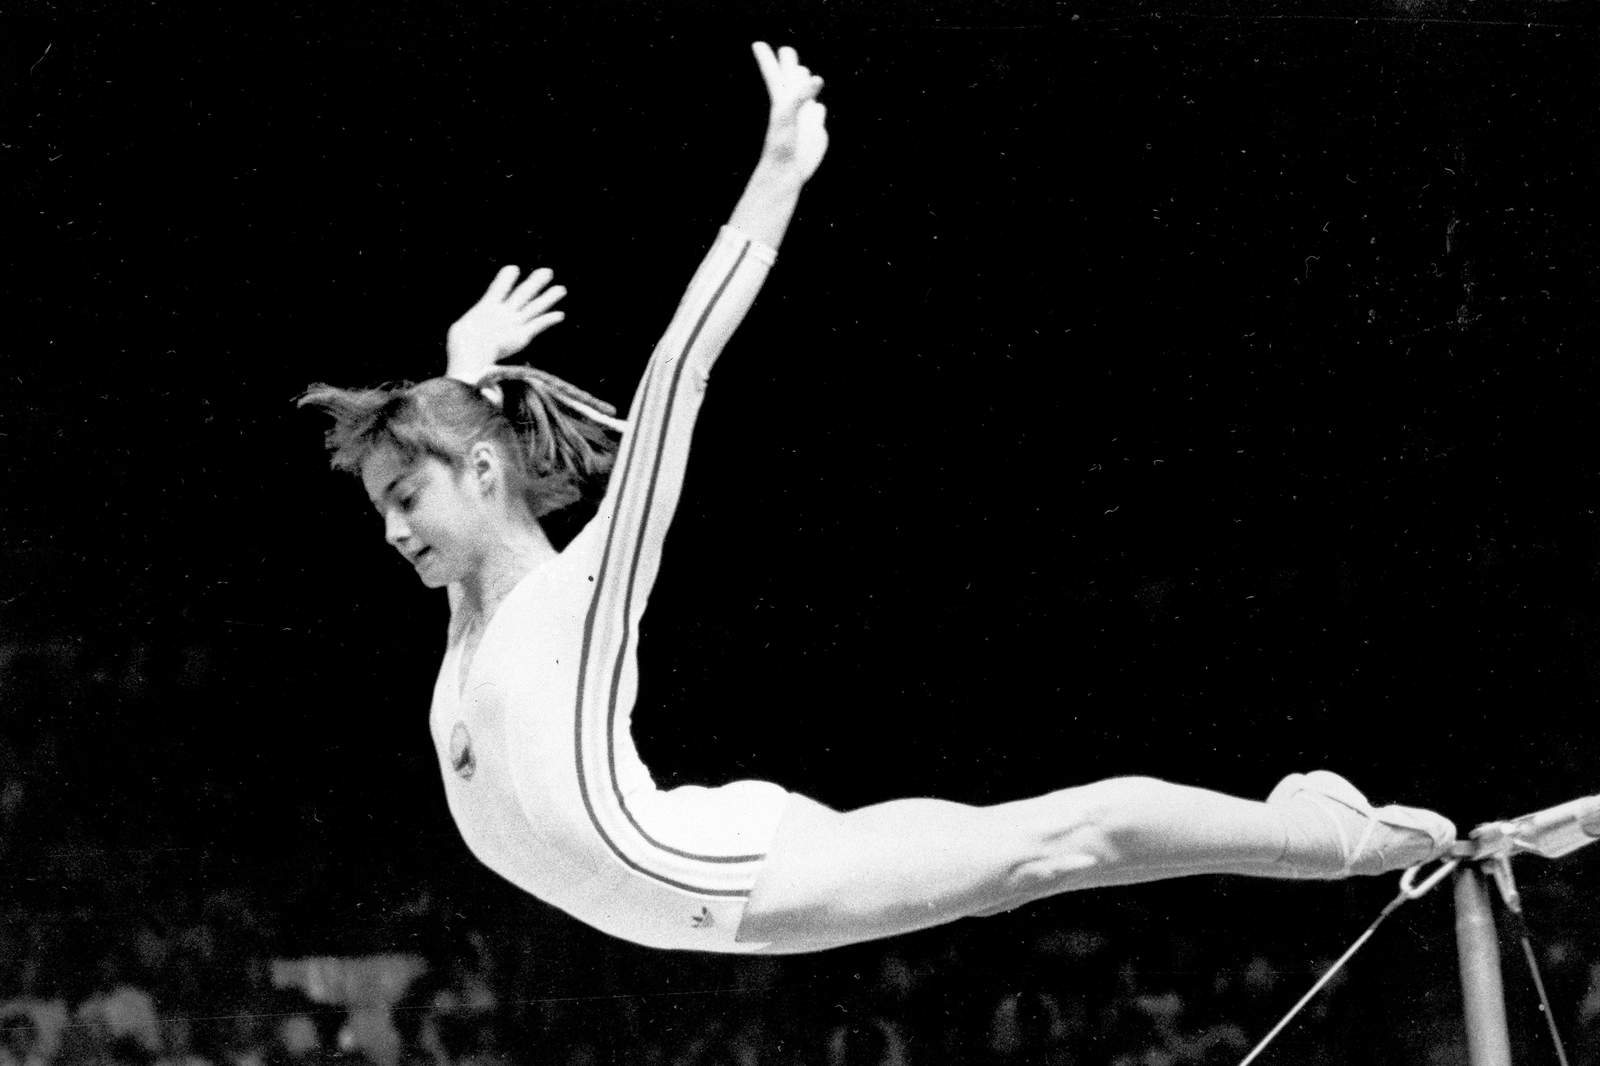 In 1976, Comaneci's perfect 10s made her the perfect one